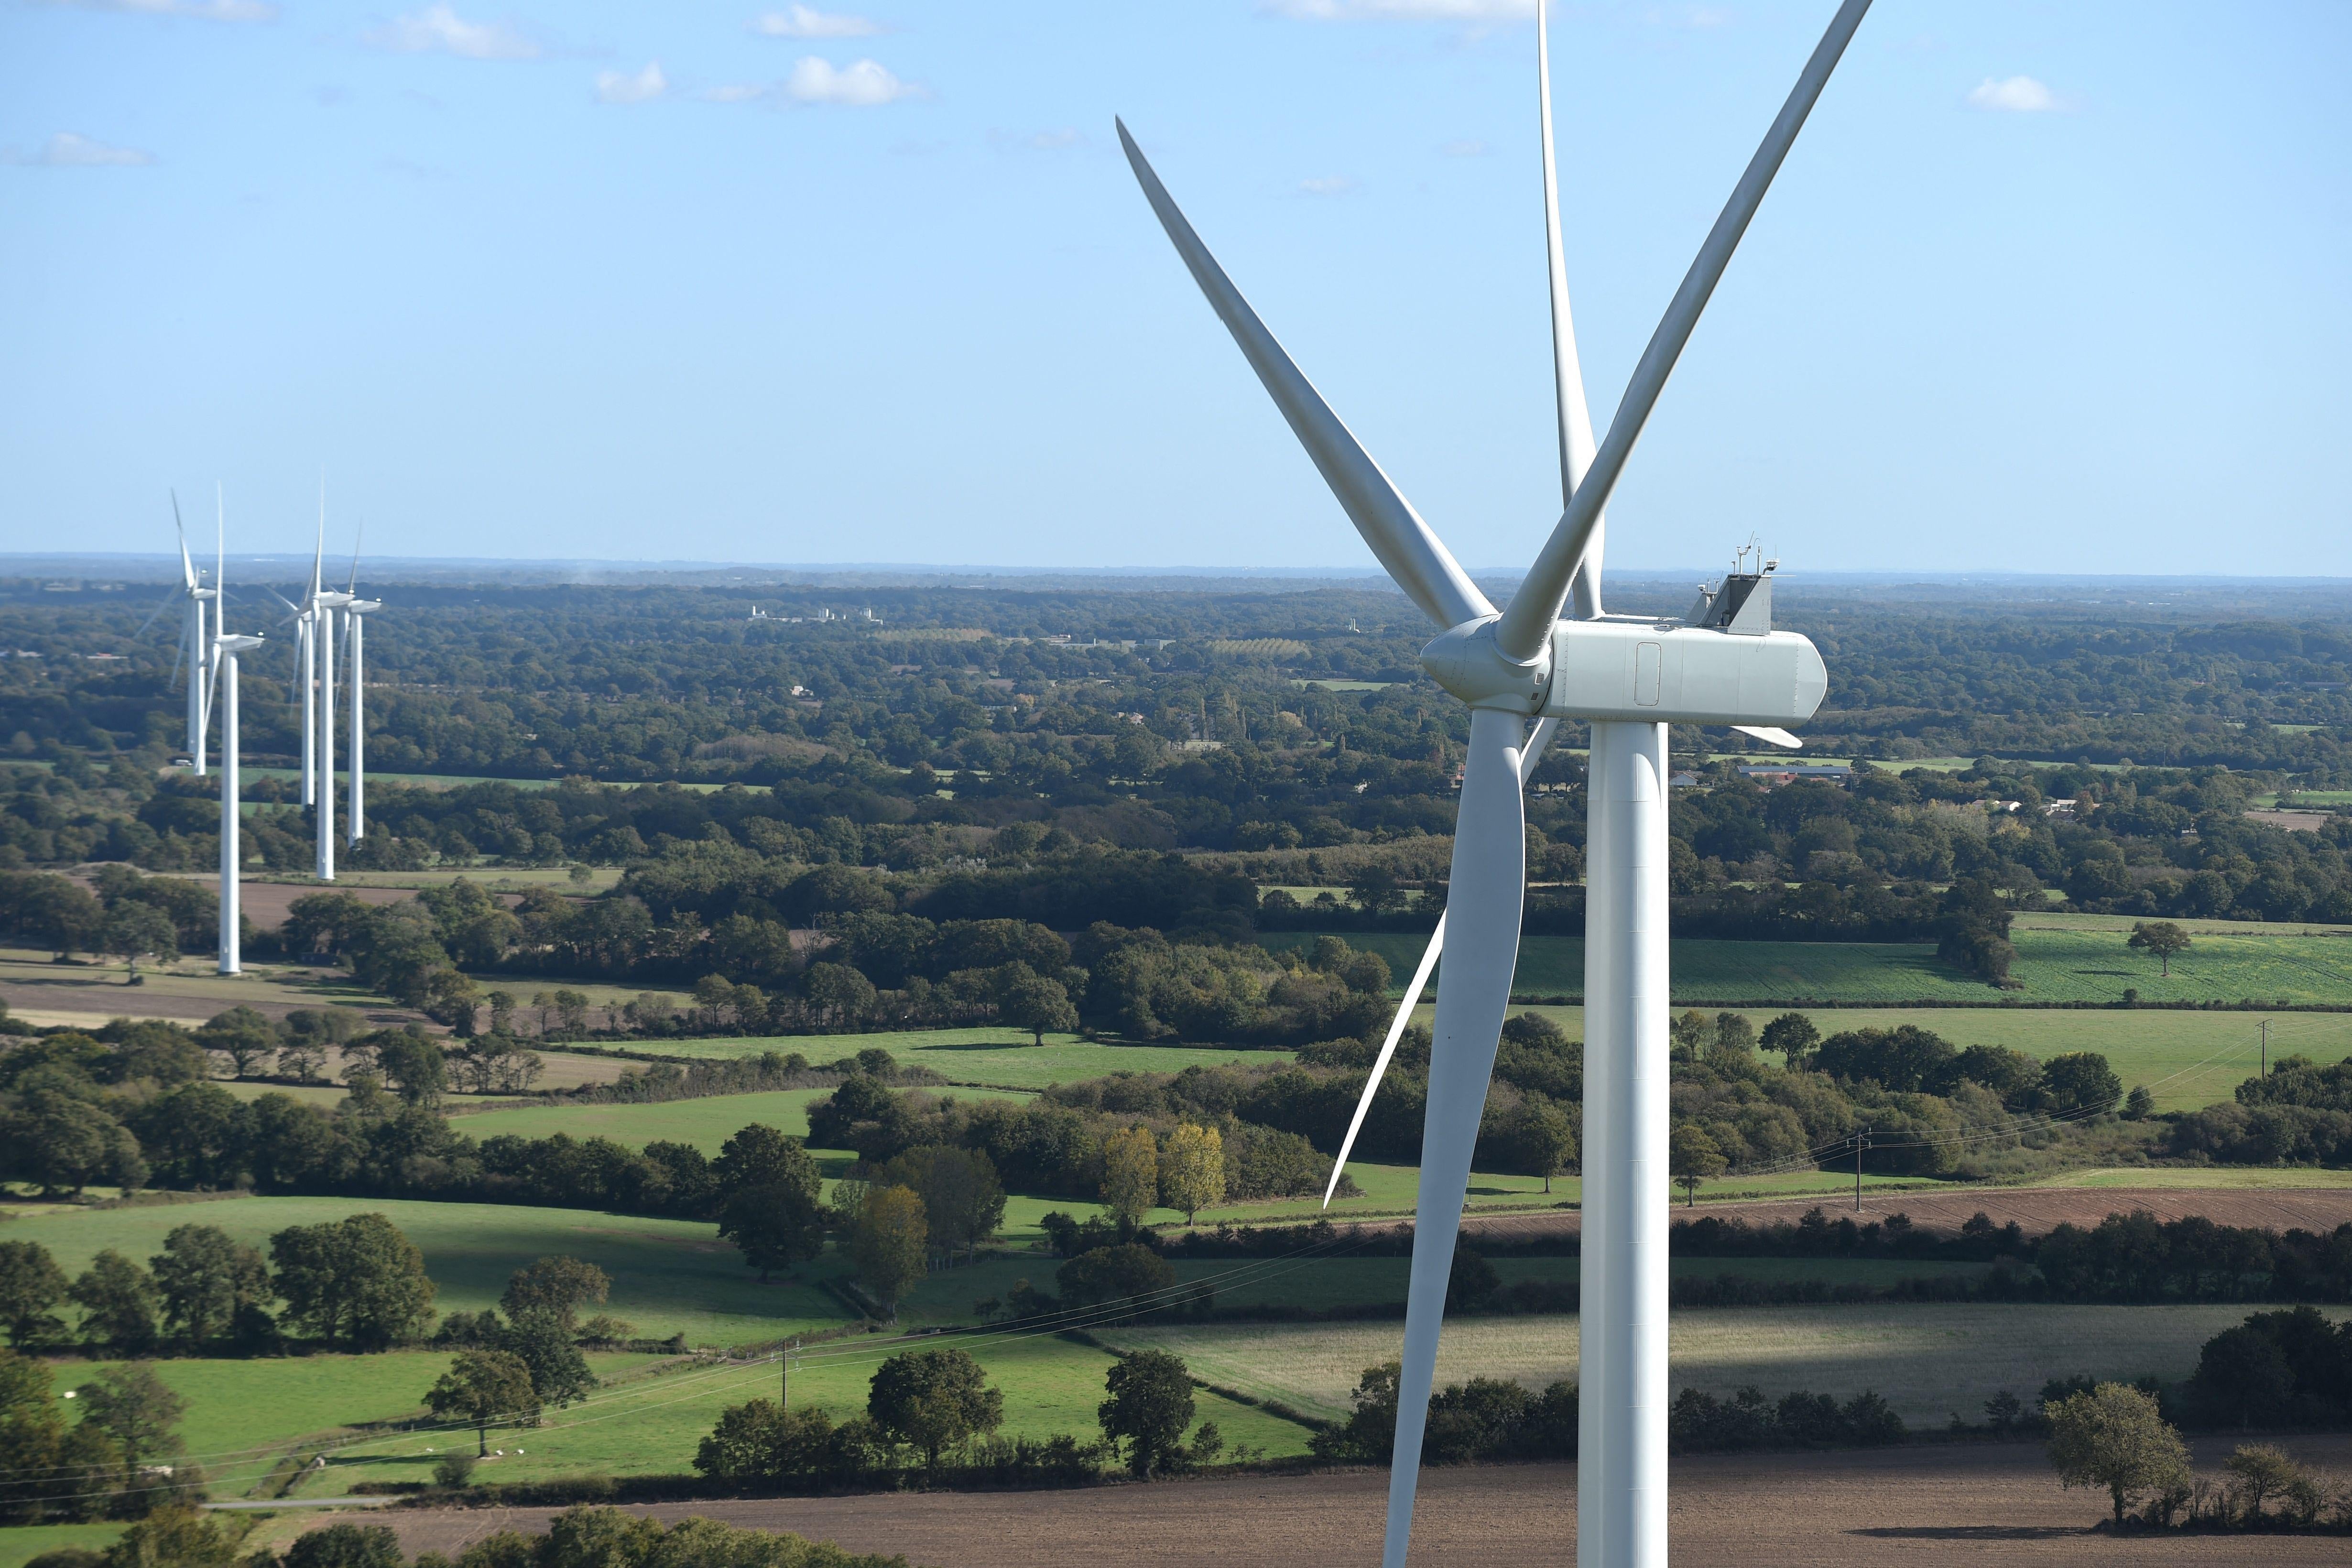 Wind turbines can be seen across a green landscape lush with trees.